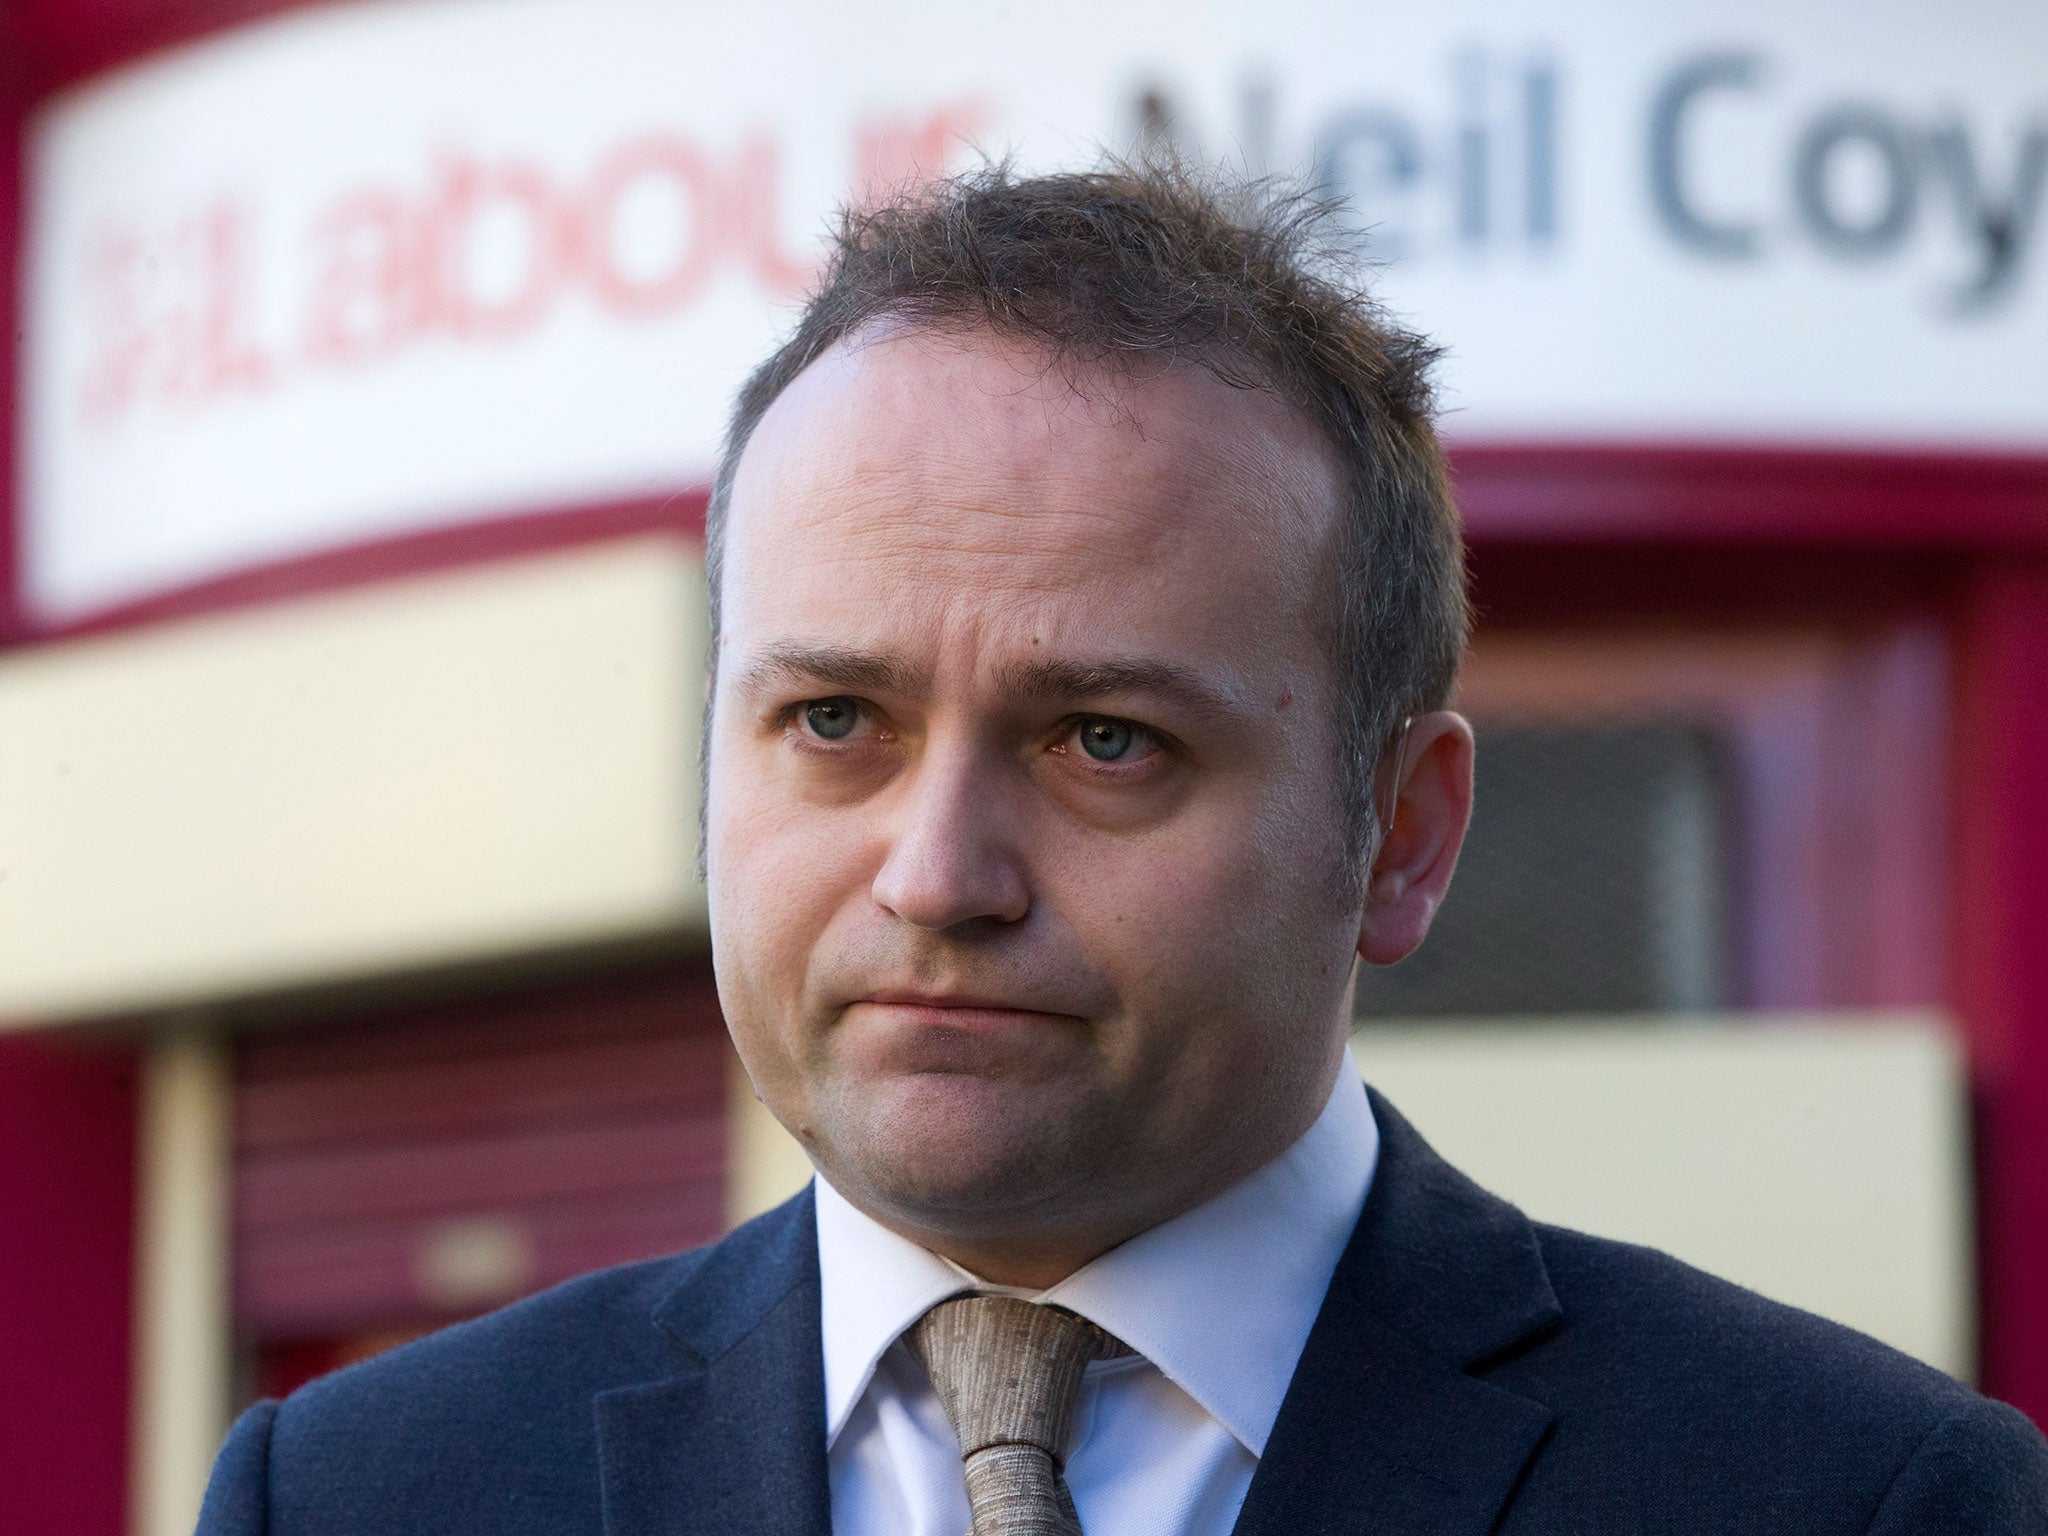 Neil Coyle was elected in 2015, and has a real fight on his hands if he wants to keep hold of his dream job for more than two years